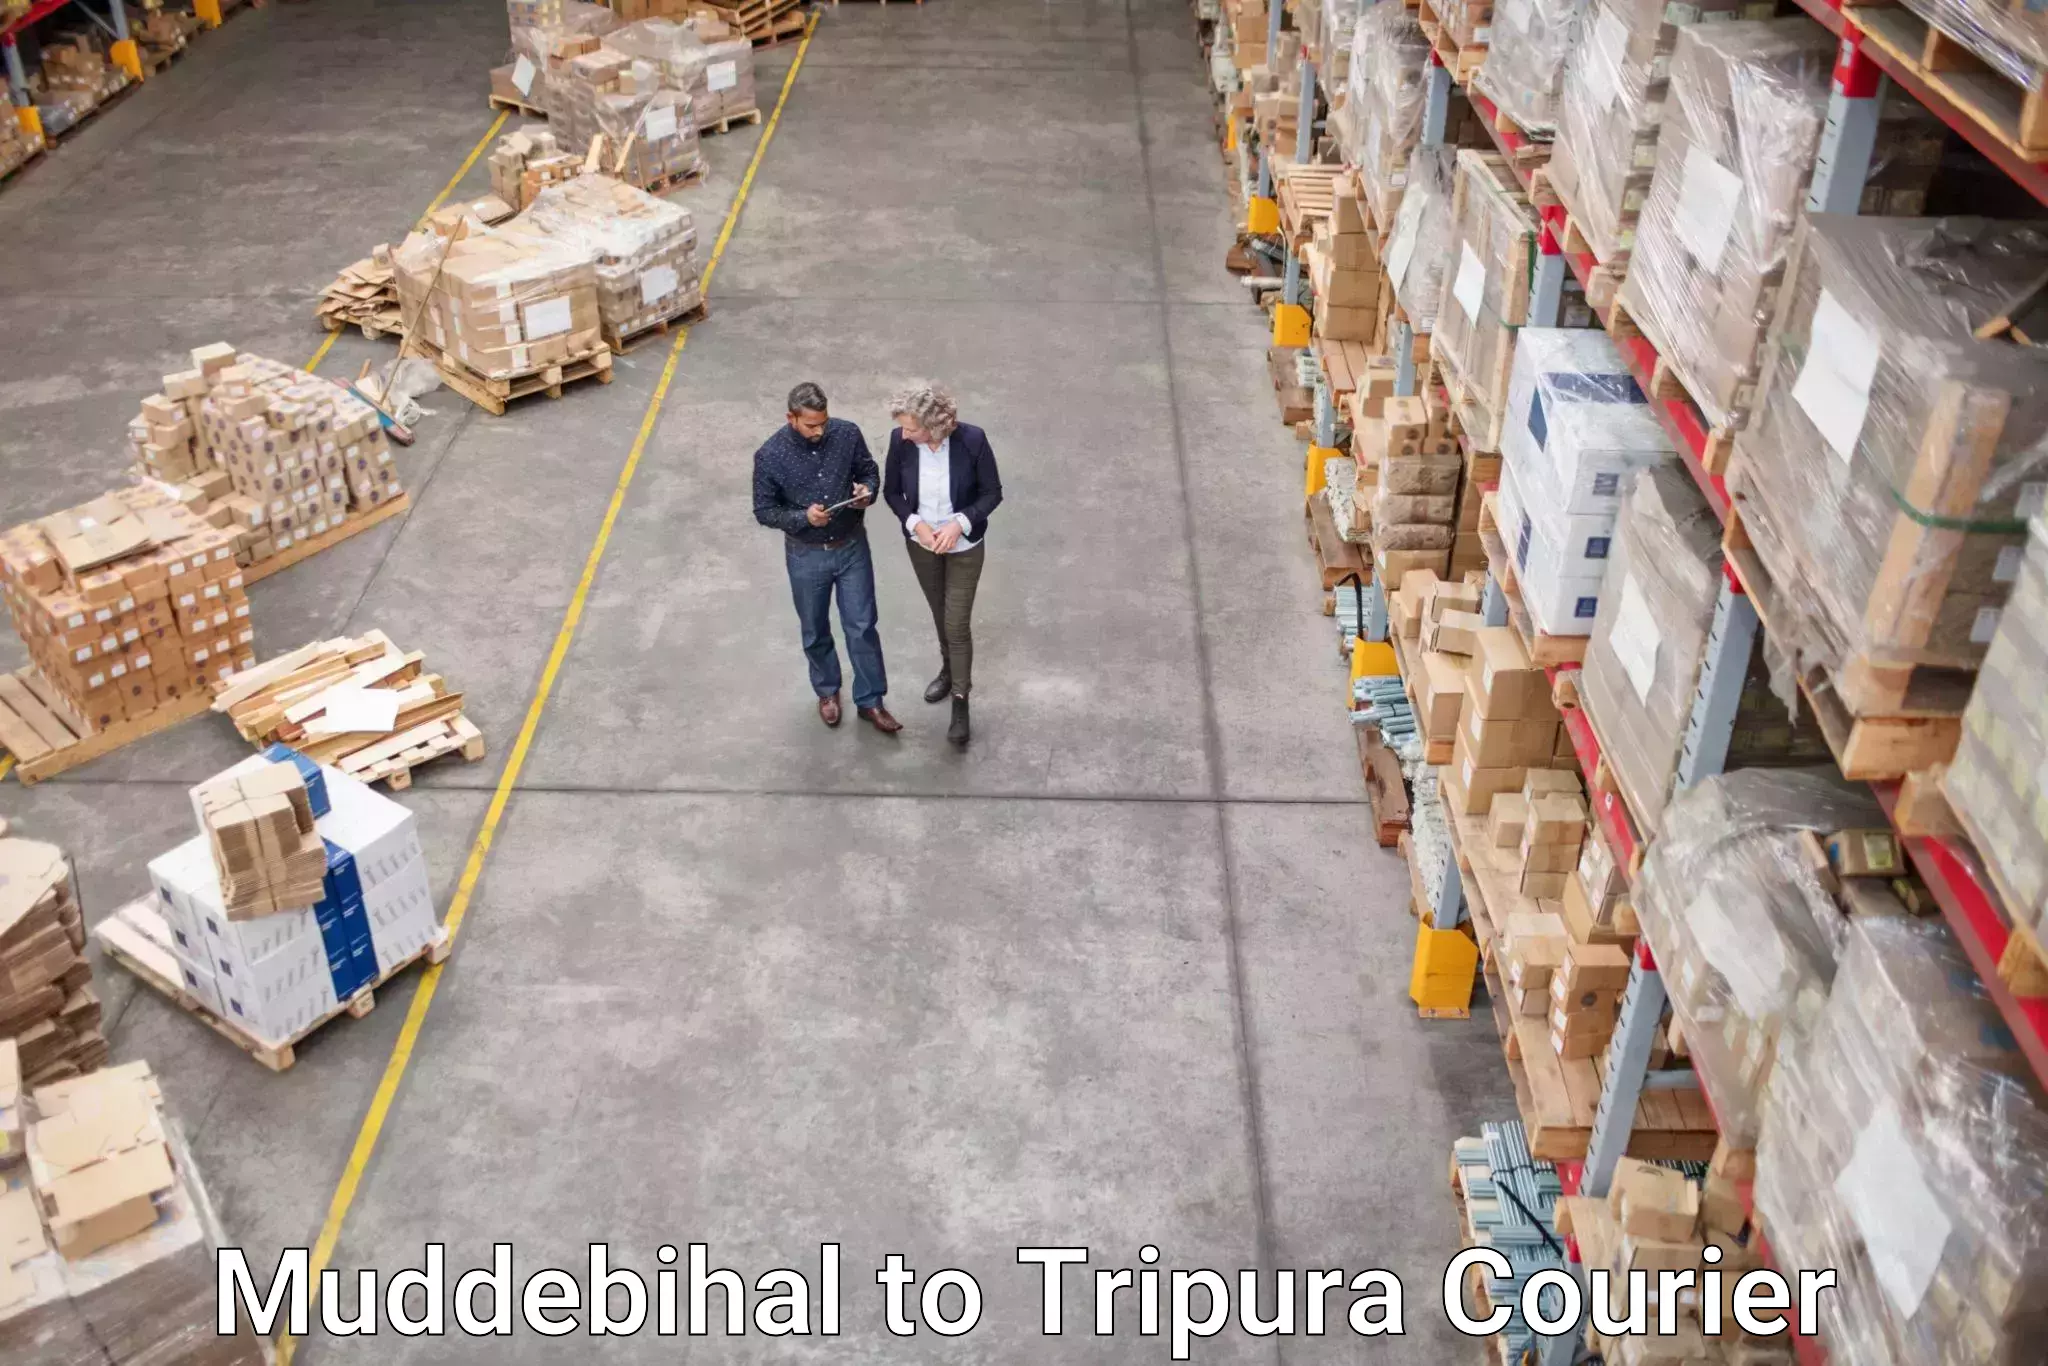 State-of-the-art courier technology Muddebihal to Tripura